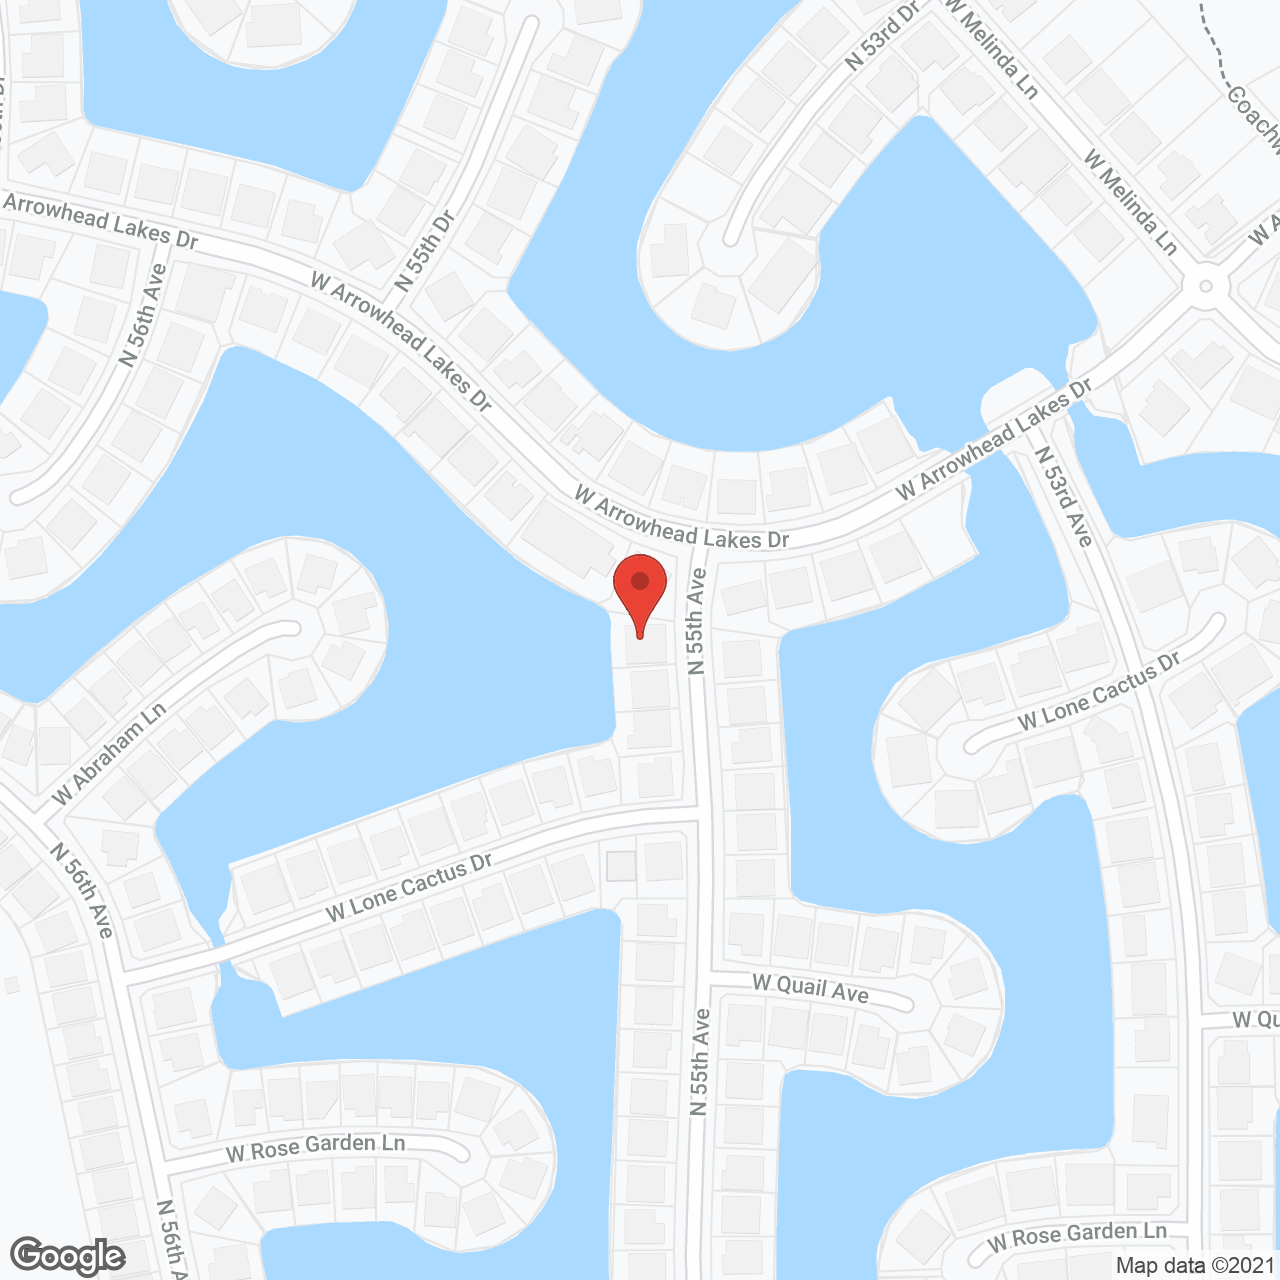 Arrowhead Lakes Adult Home Care in google map